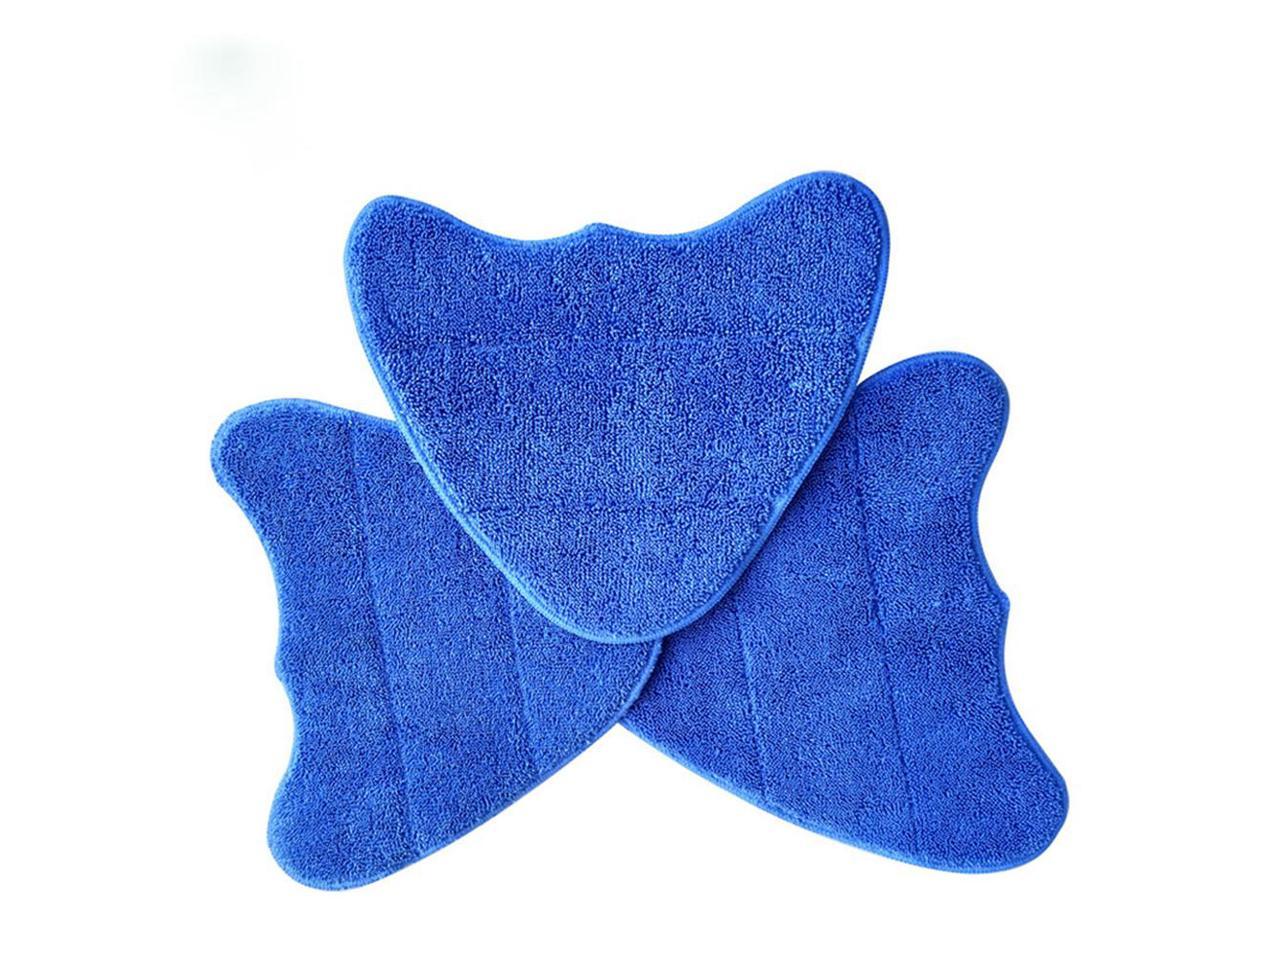 2 Pieces/set Washable Mop Pad Cleaning Cloth For Vax Steam Cleaner Mop Pads 